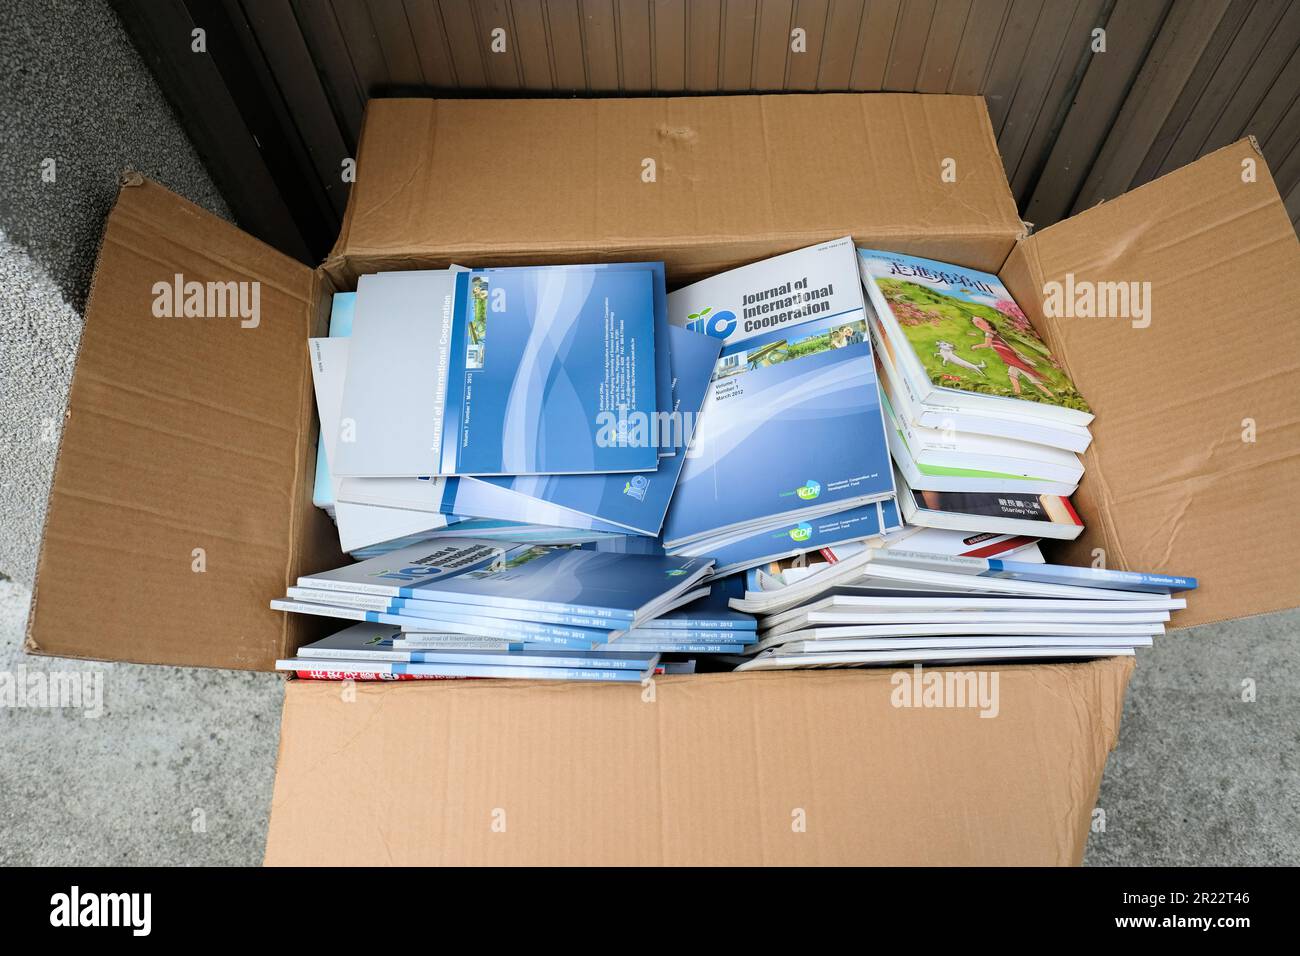 Discarded copies of The Journal of International Cooperation, a scientific journal published by the Taiwan International Cooperation Alliance, Taipei. Stock Photo